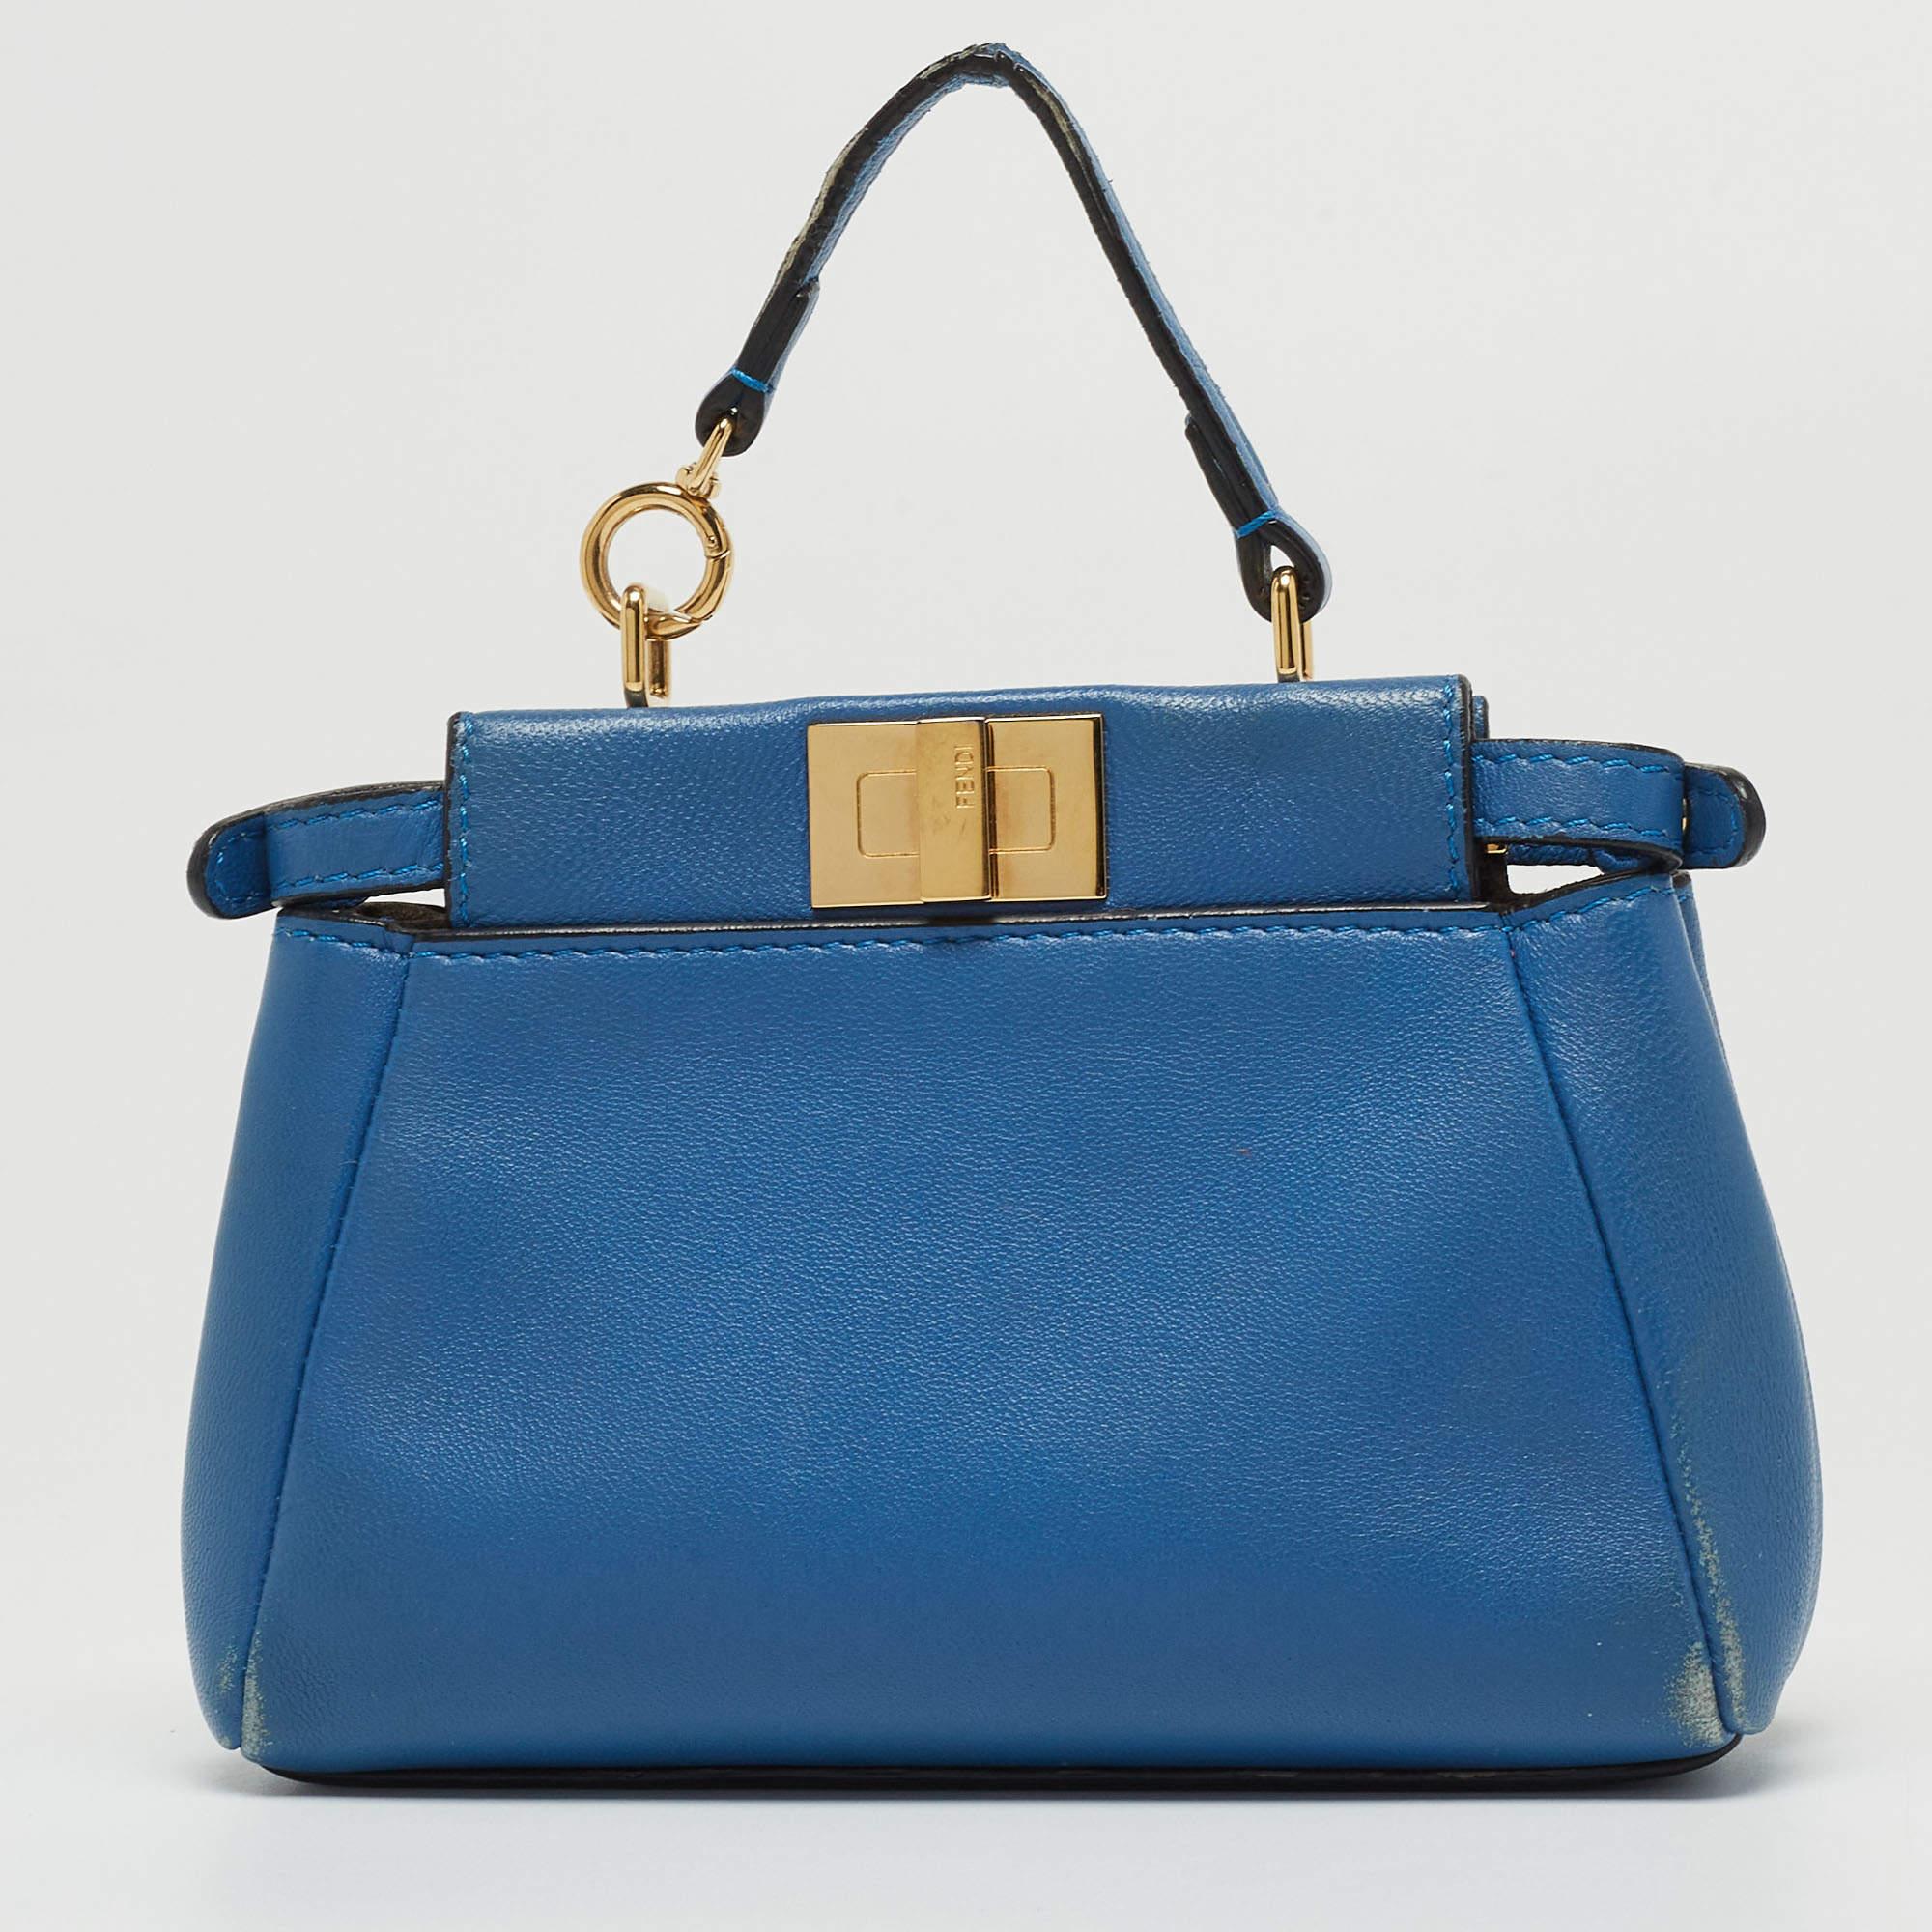 The iconic 'Peekaboo' collection from the house of Fendi is reinvented in a micro-silhouette for the spring. Designed in a luxe blue hue, this refined bag comes with a top handle and a shoulder strap. It features polished silver hardware and secured